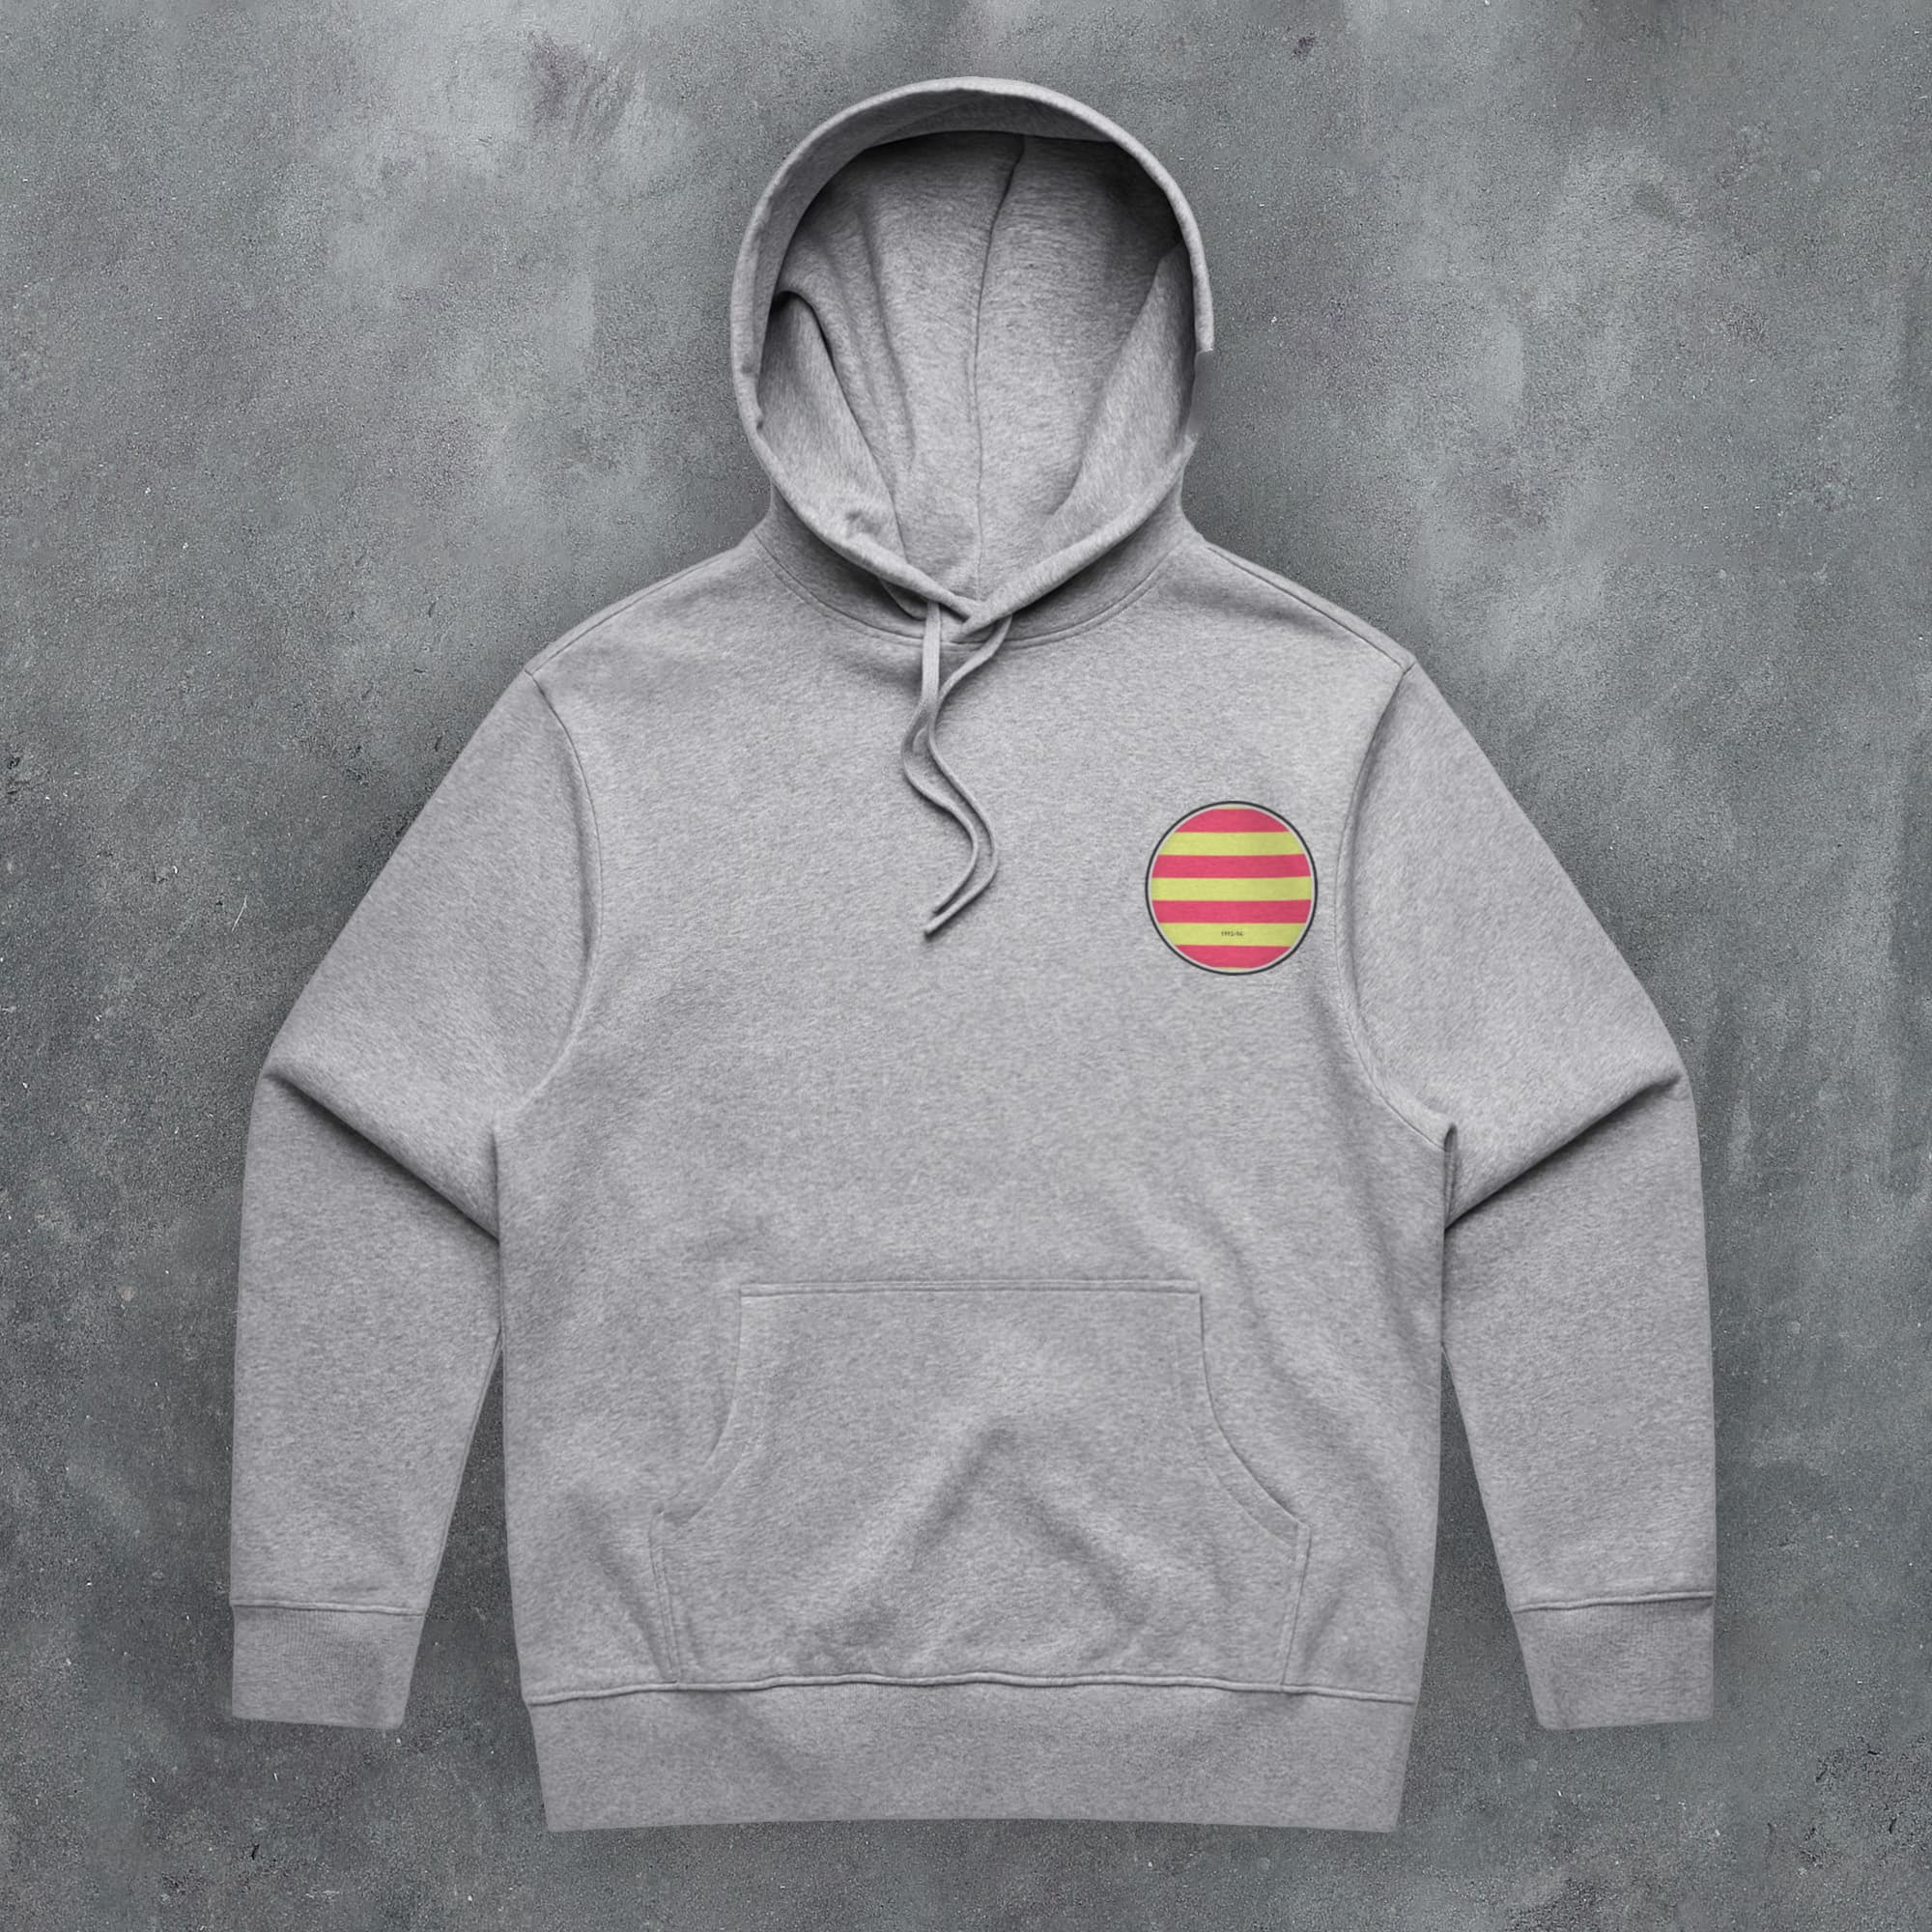 a grey hoodie with a red and yellow stripe on it